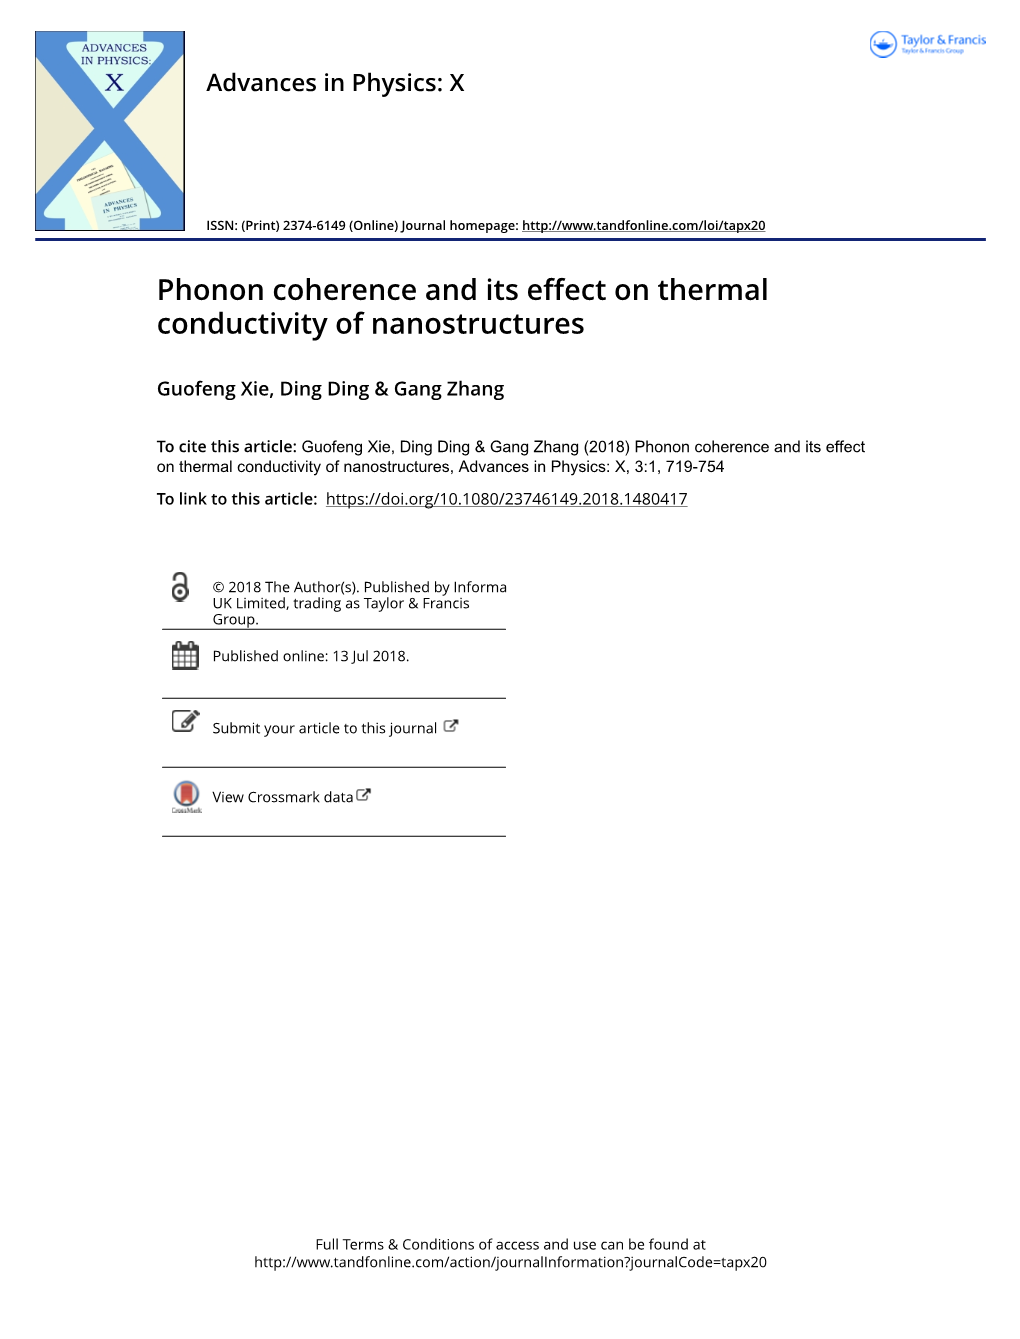 Phonon Coherence and Its Effect on Thermal Conductivity of Nanostructures